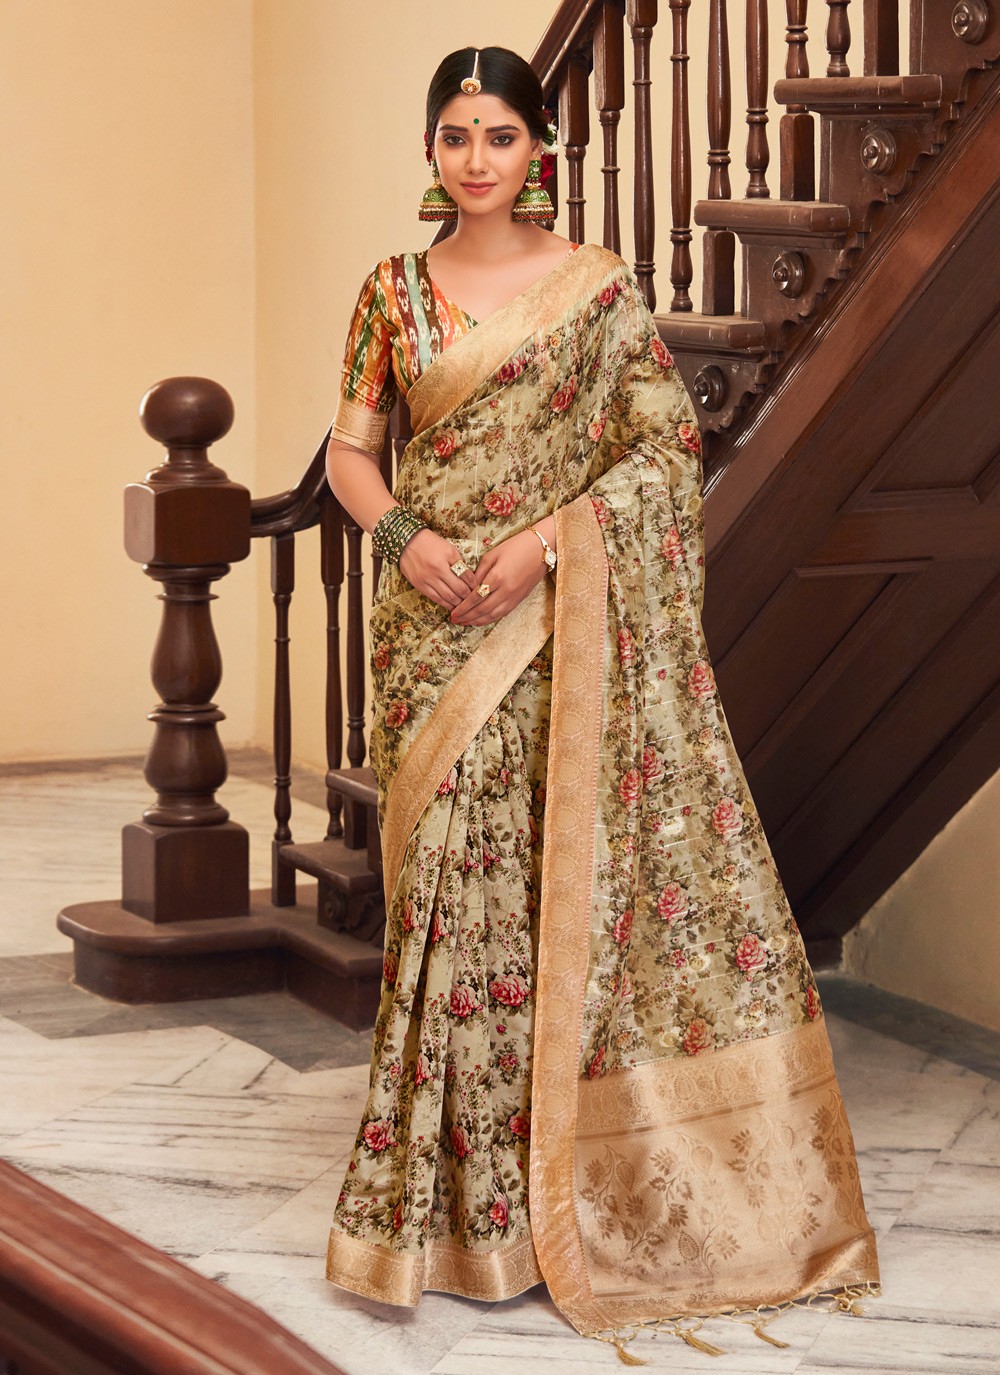 Photo of South Indian bridal look in pink and green saree